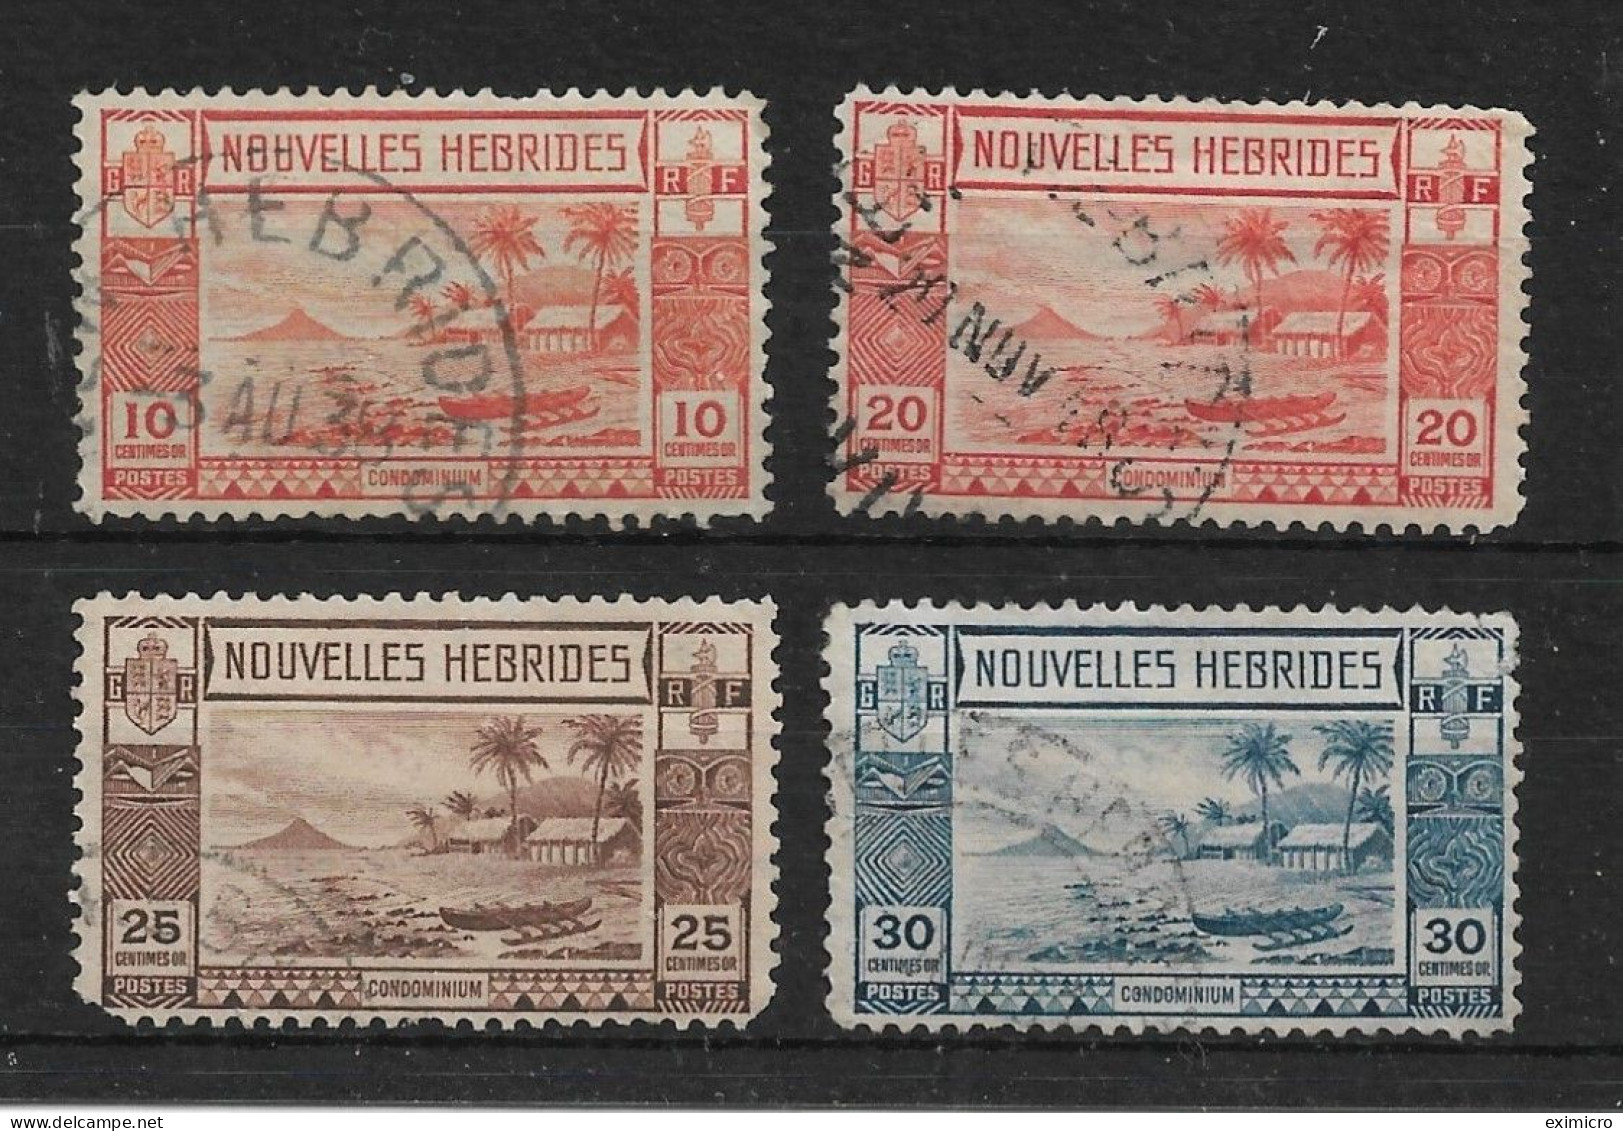 NEW HEBRIDES (FRENCH CURRENCY) 1938 10c, 20c, 25c, 30c SG F54, F56, F57, F58 FINE USED Cat £26 - Used Stamps